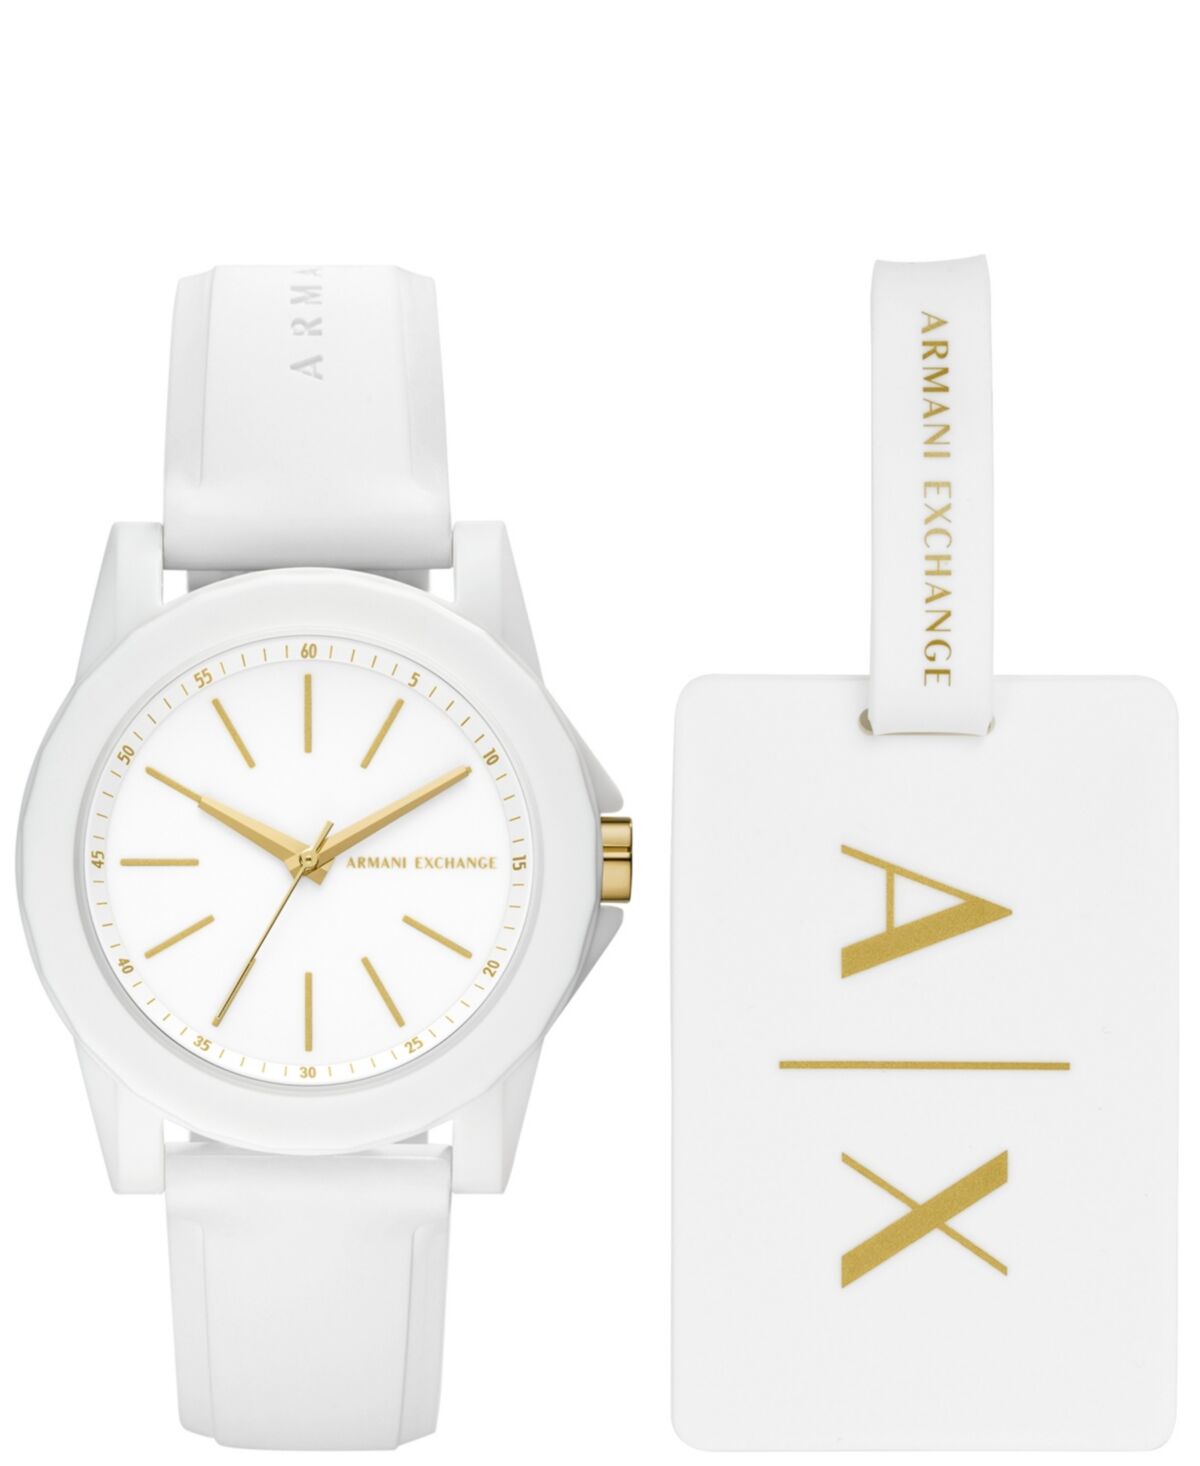 A|x Armani Exchange Ax Women's White Silicone Strap Watch with Luggage Tag 36mm - White